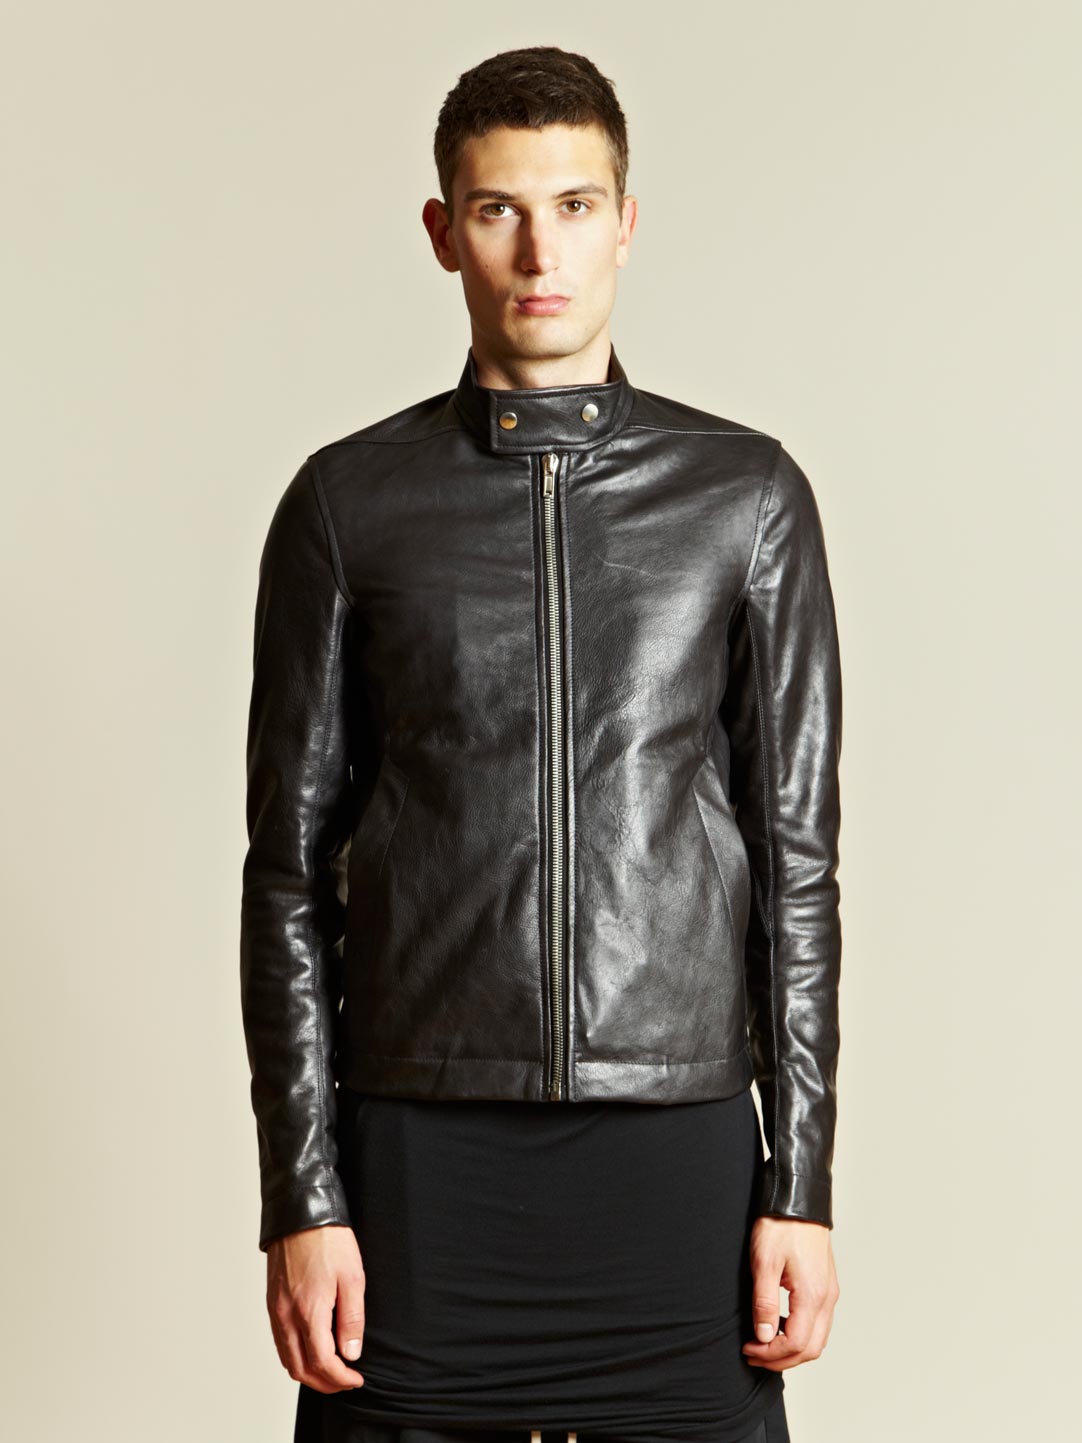 Lyst - Rick Owens Rover Leather Jacket in Black for Men